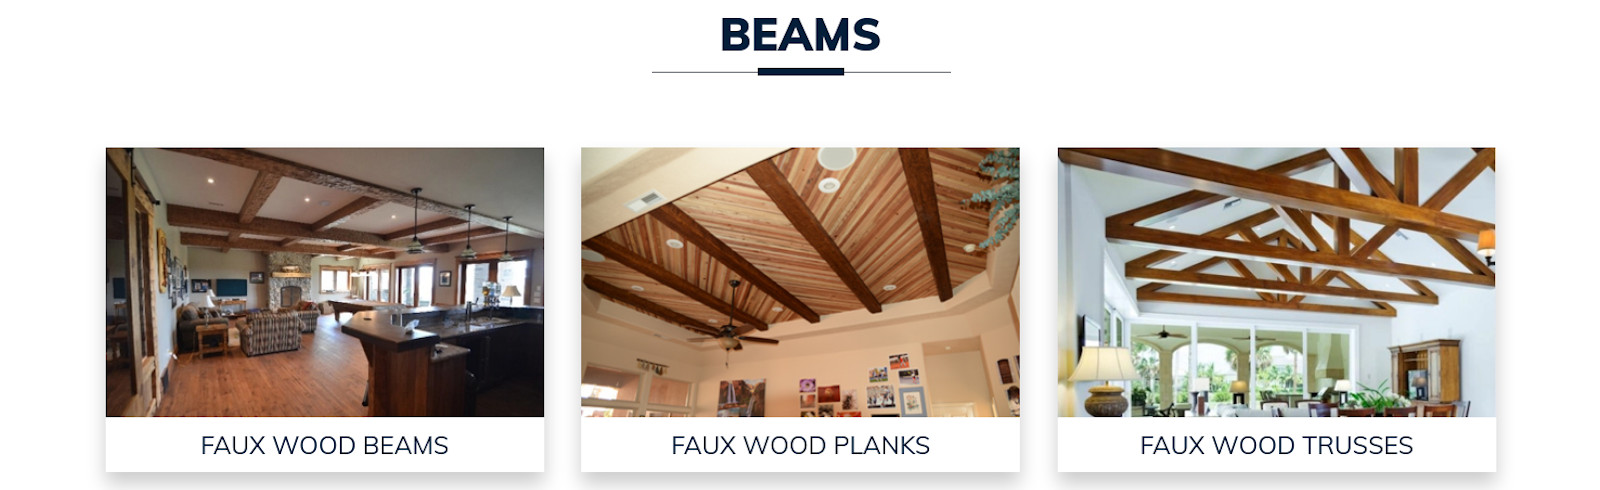 beams discounted price